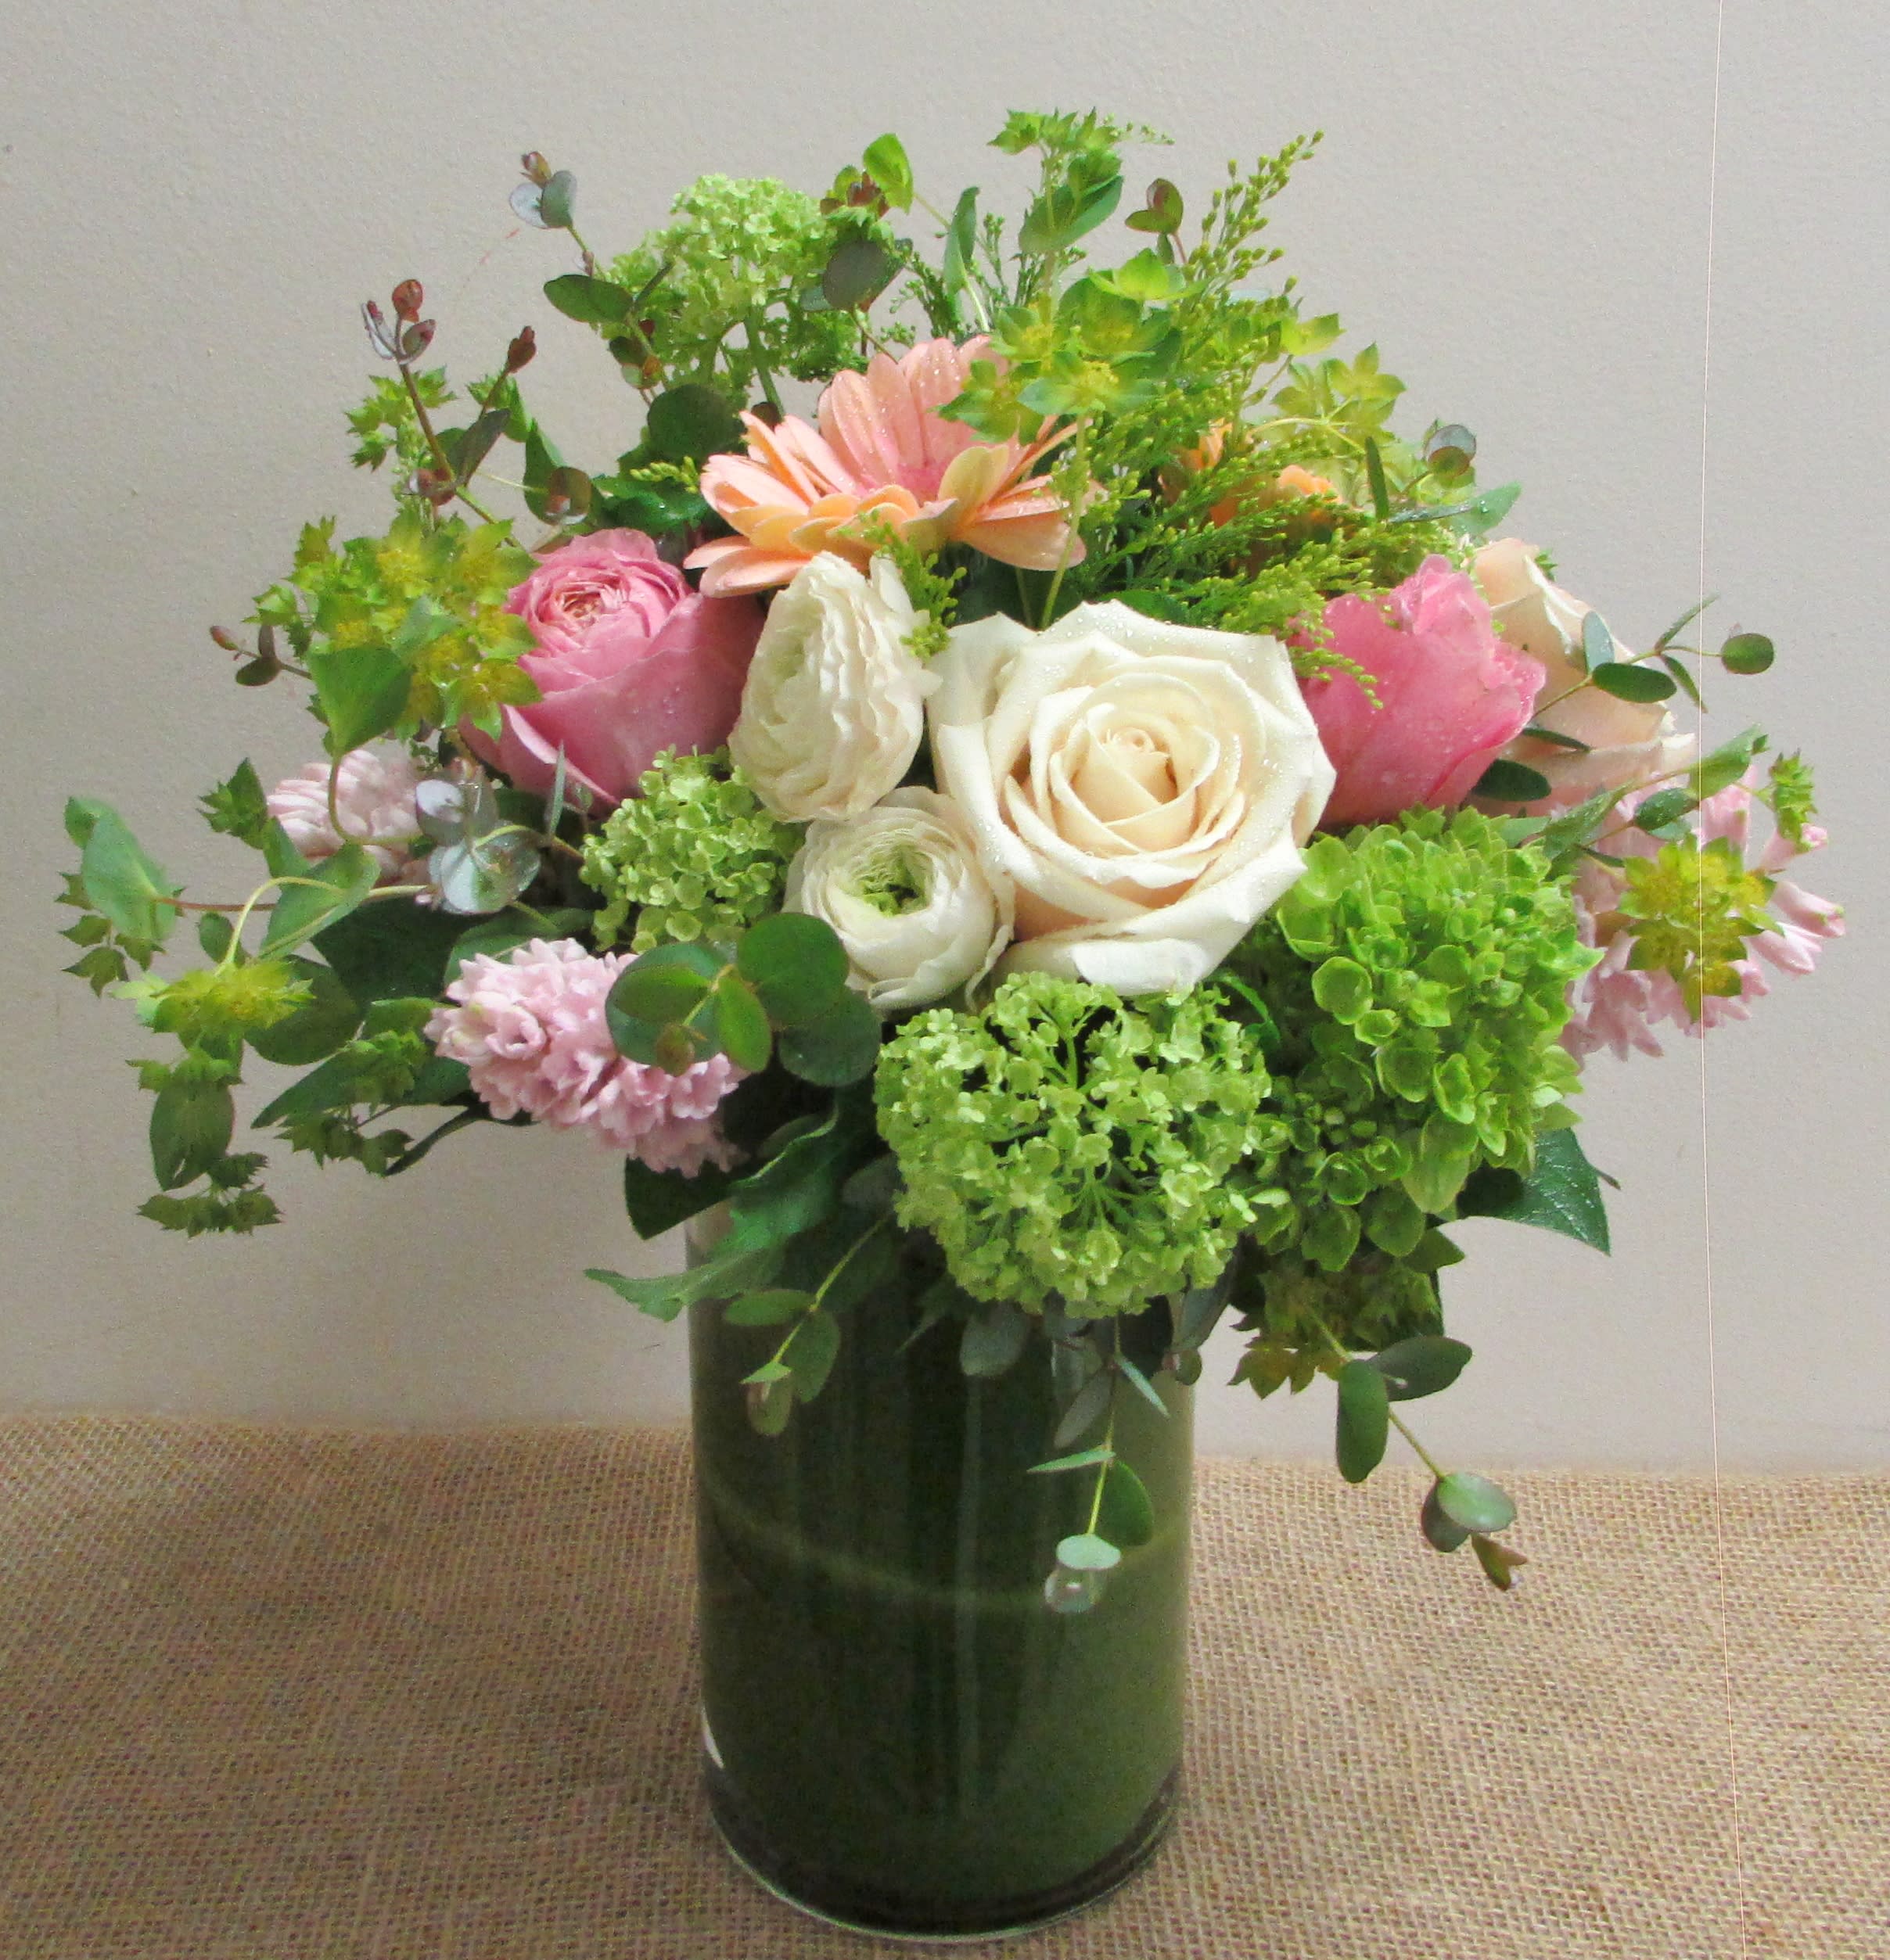 Beauty and Love - A beautiful arrangement of muted colors for a lovely and classy spring arrangement. Arranged in a lower glass vase 